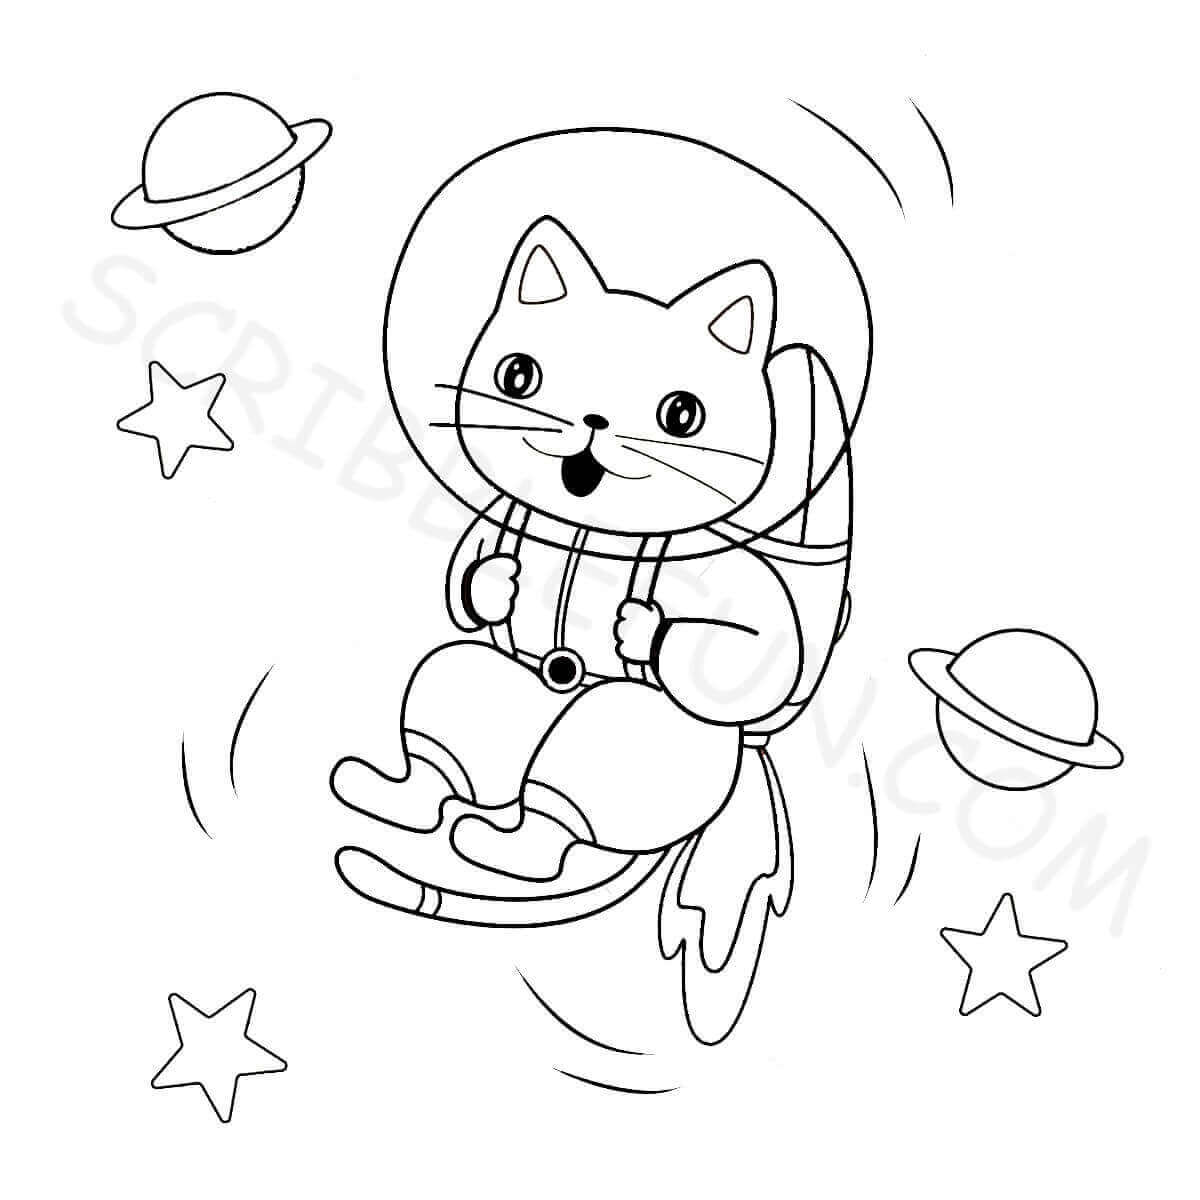 Astronaut Cat Coloring Page